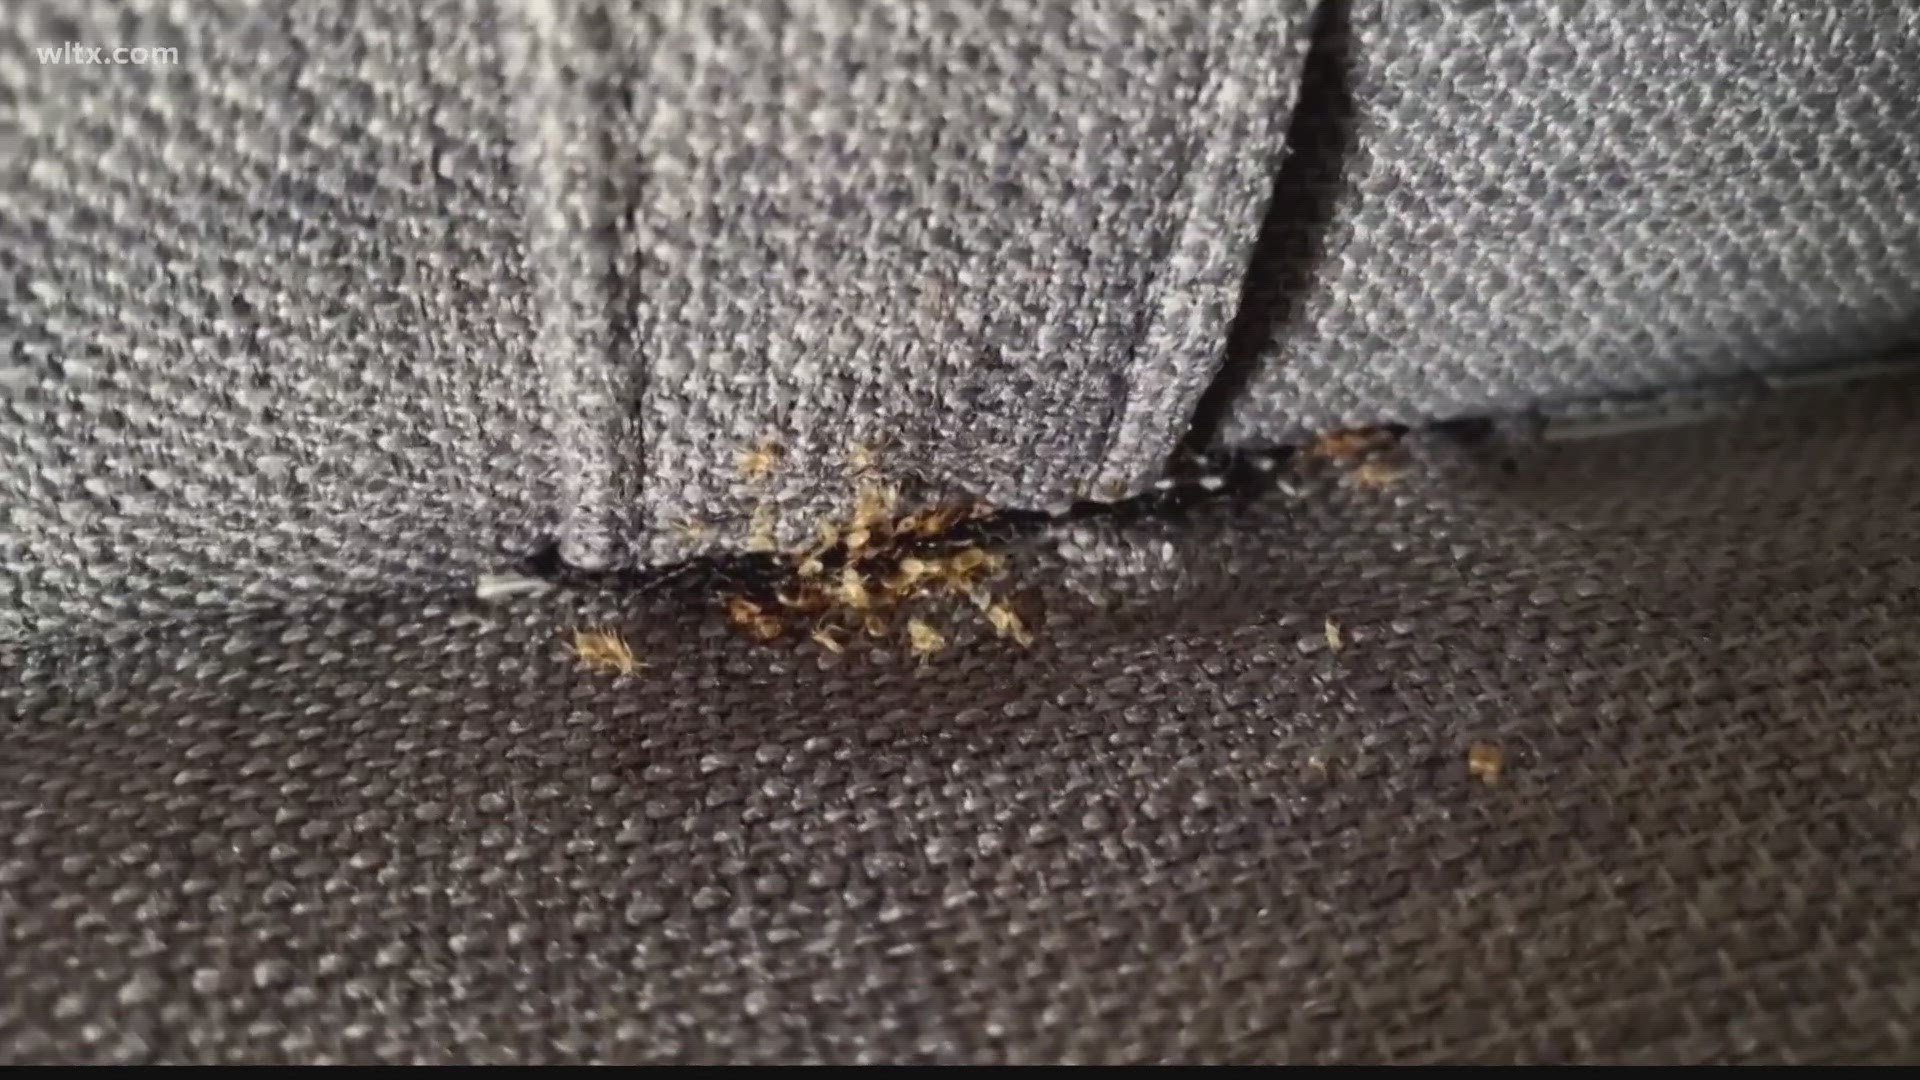 Horrified train passengers have shared videos of the insects on social media, prompting many travelers to pay extra attention before they sit down.